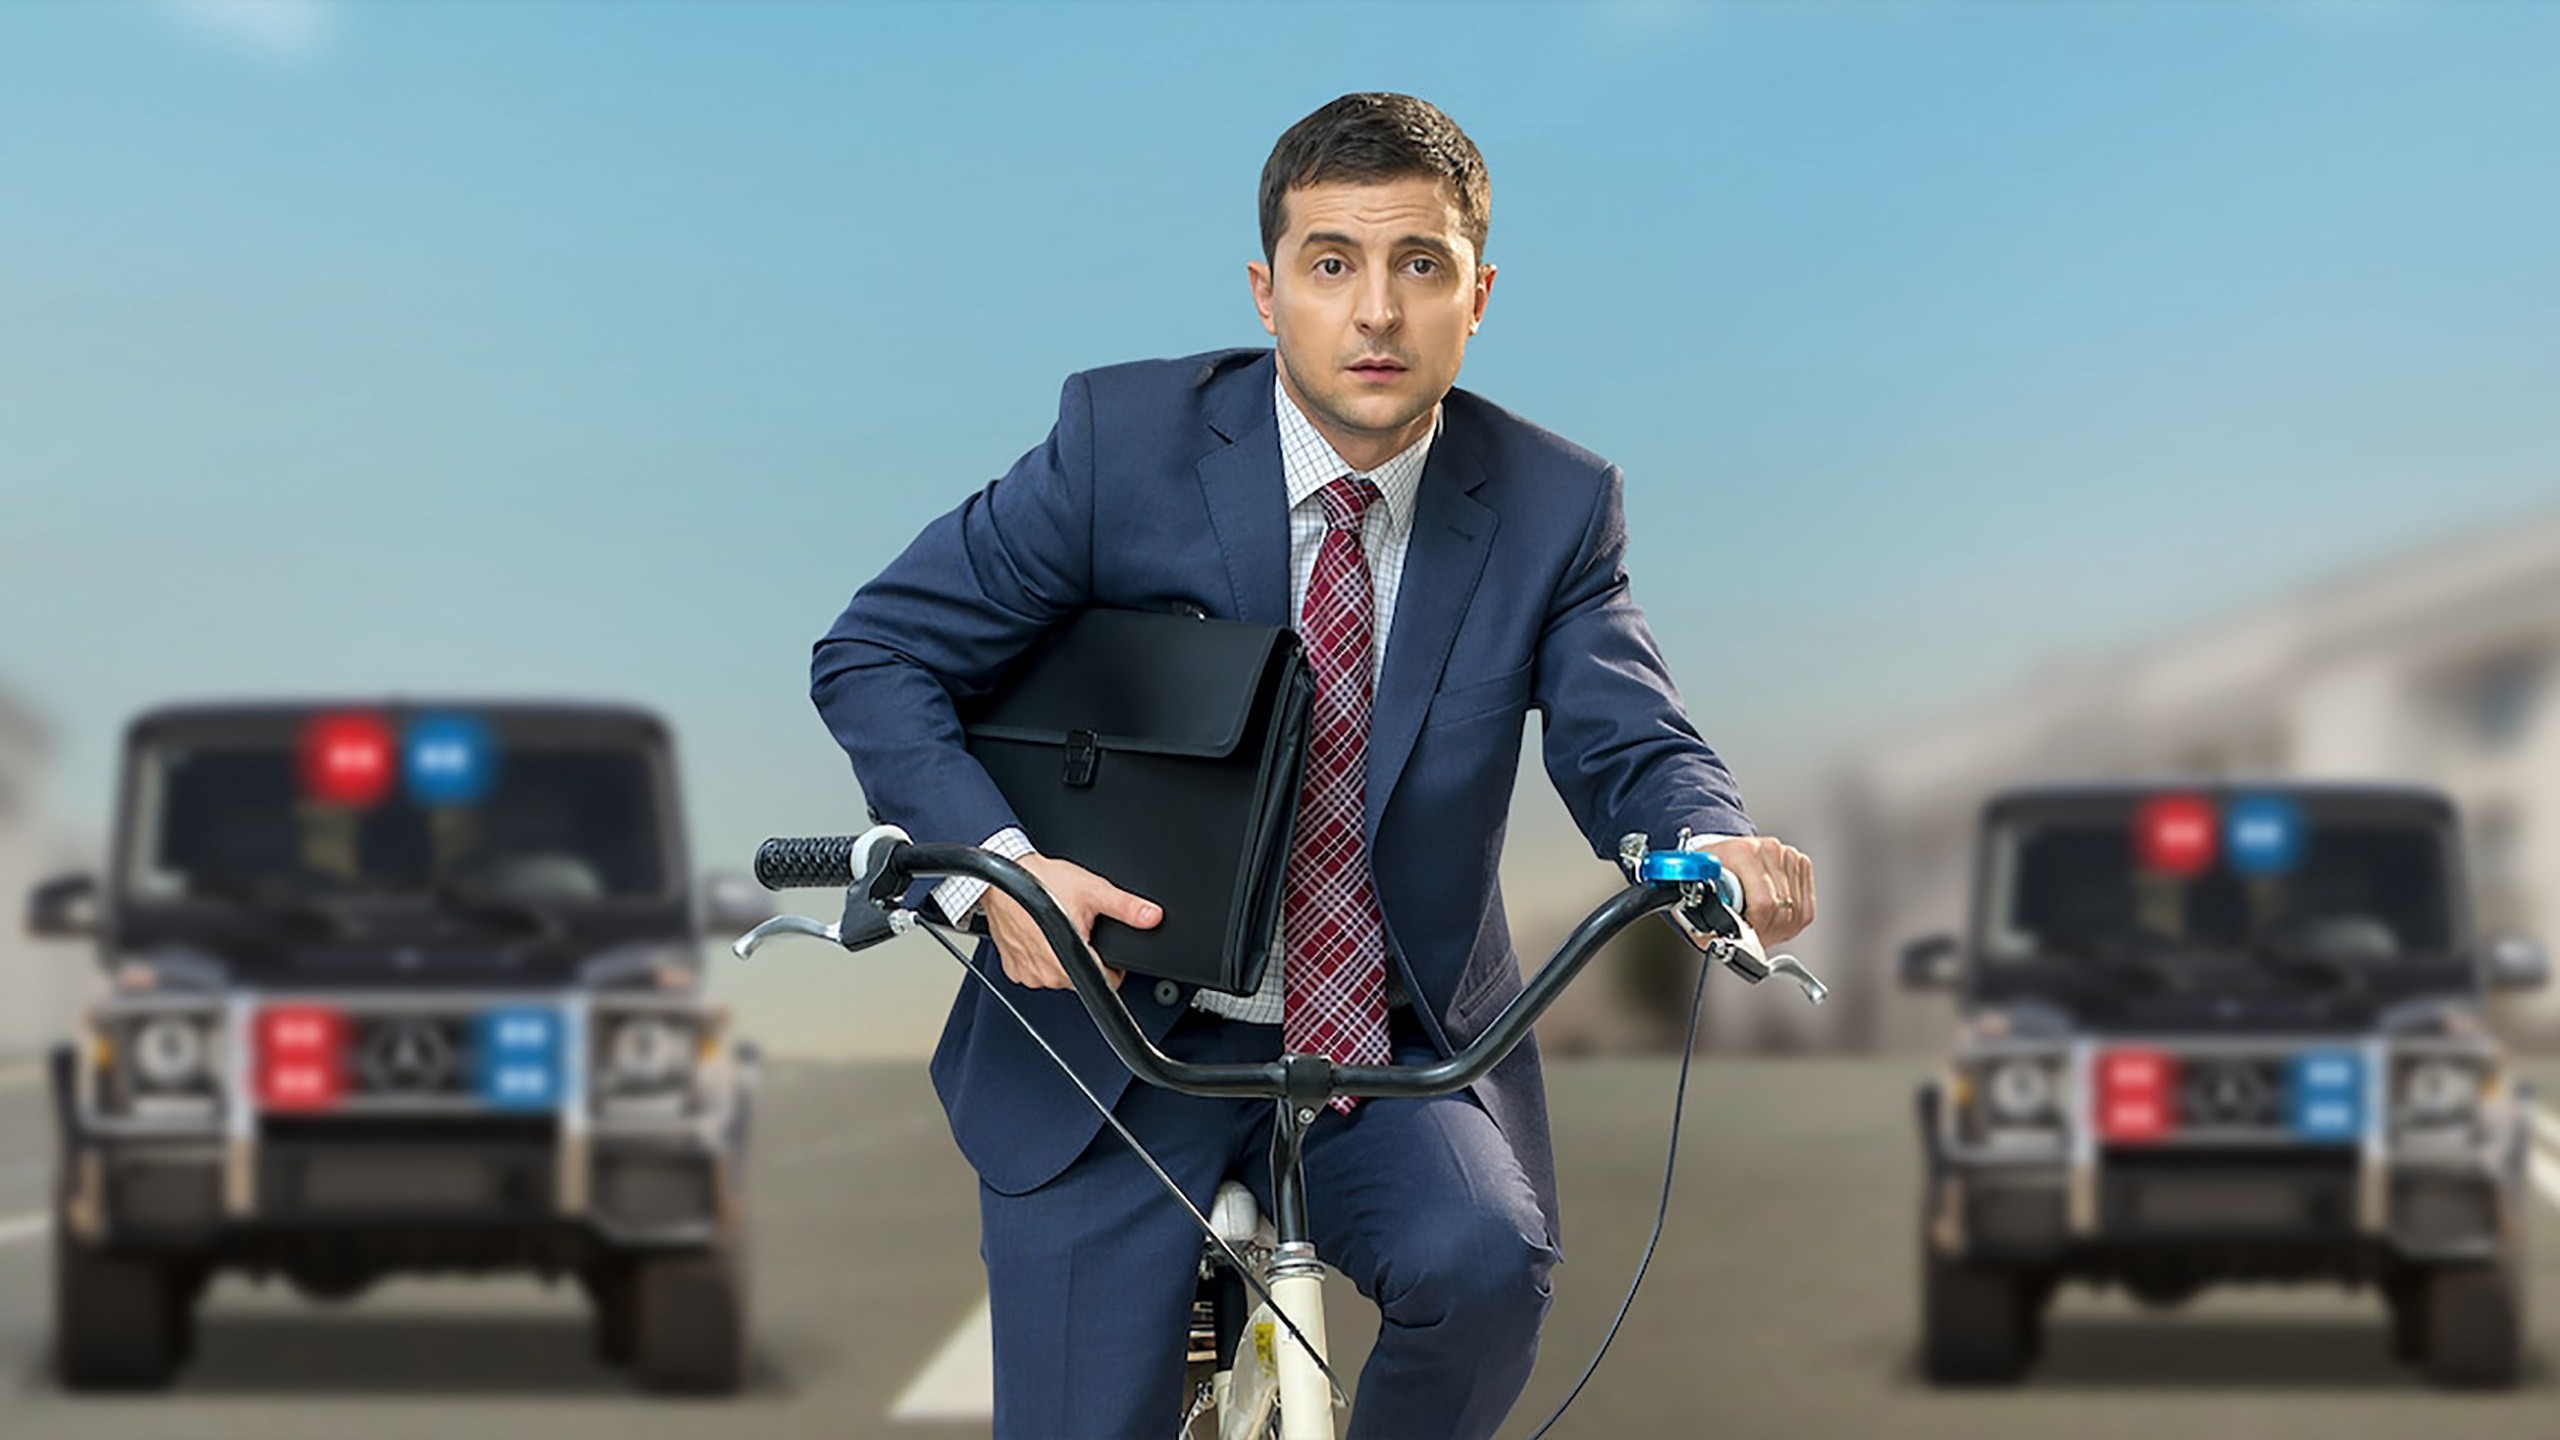 Volodymyr Zelenskyy riding a bike and clutching a briefcase